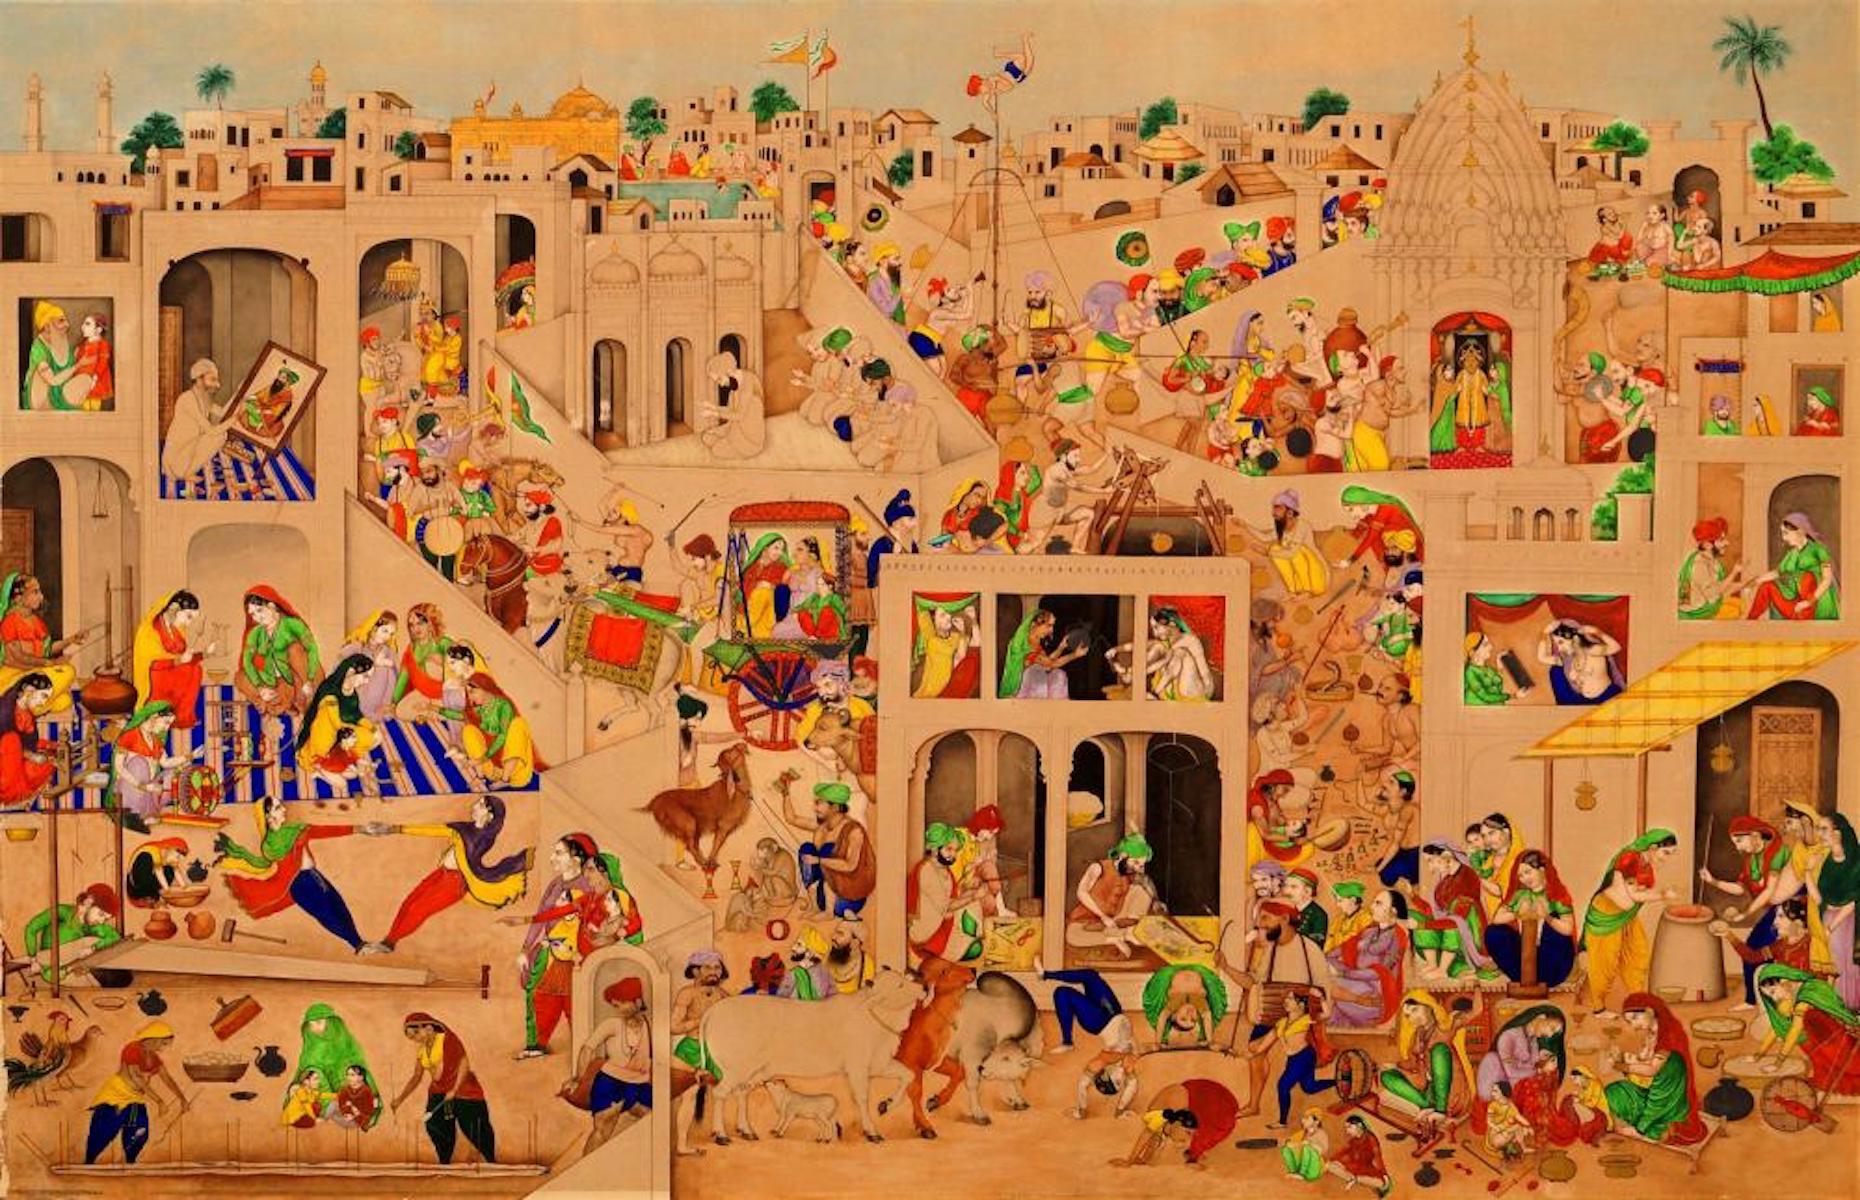 The Indian painting sold for $120,400 (£92.25k)